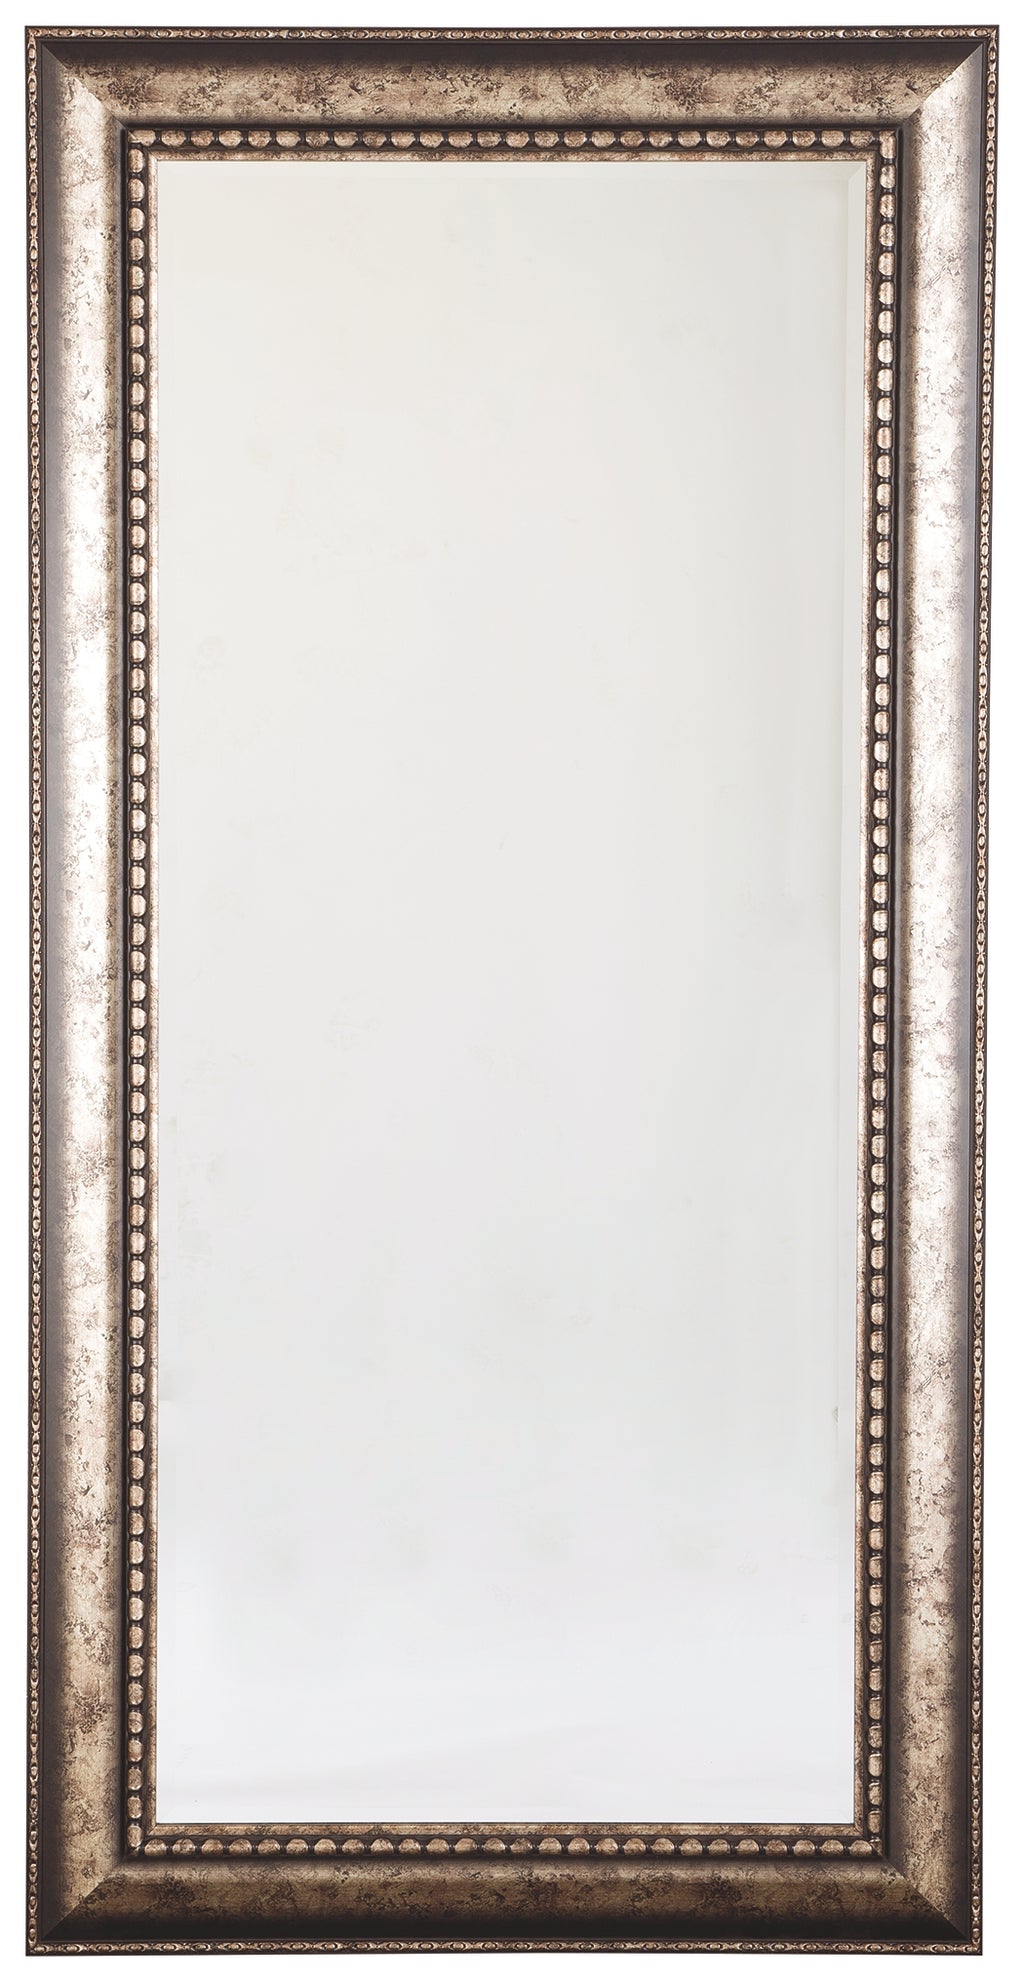 Dulal A8010083 Antique Silver Finish Floor Mirror